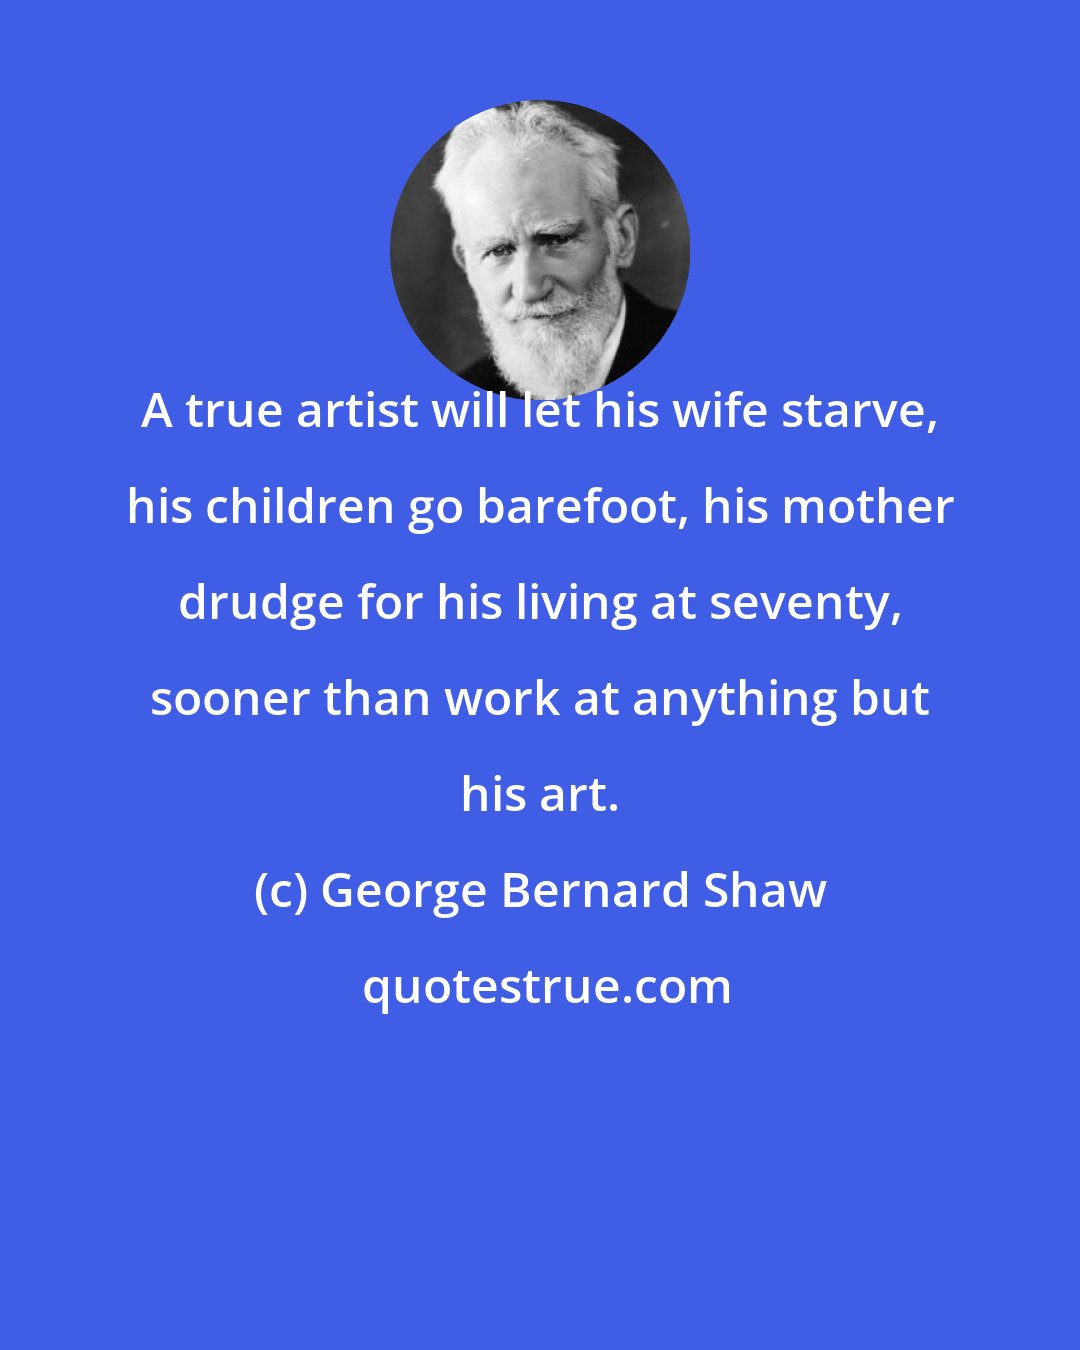 George Bernard Shaw: A true artist will let his wife starve, his children go barefoot, his mother drudge for his living at seventy, sooner than work at anything but his art.